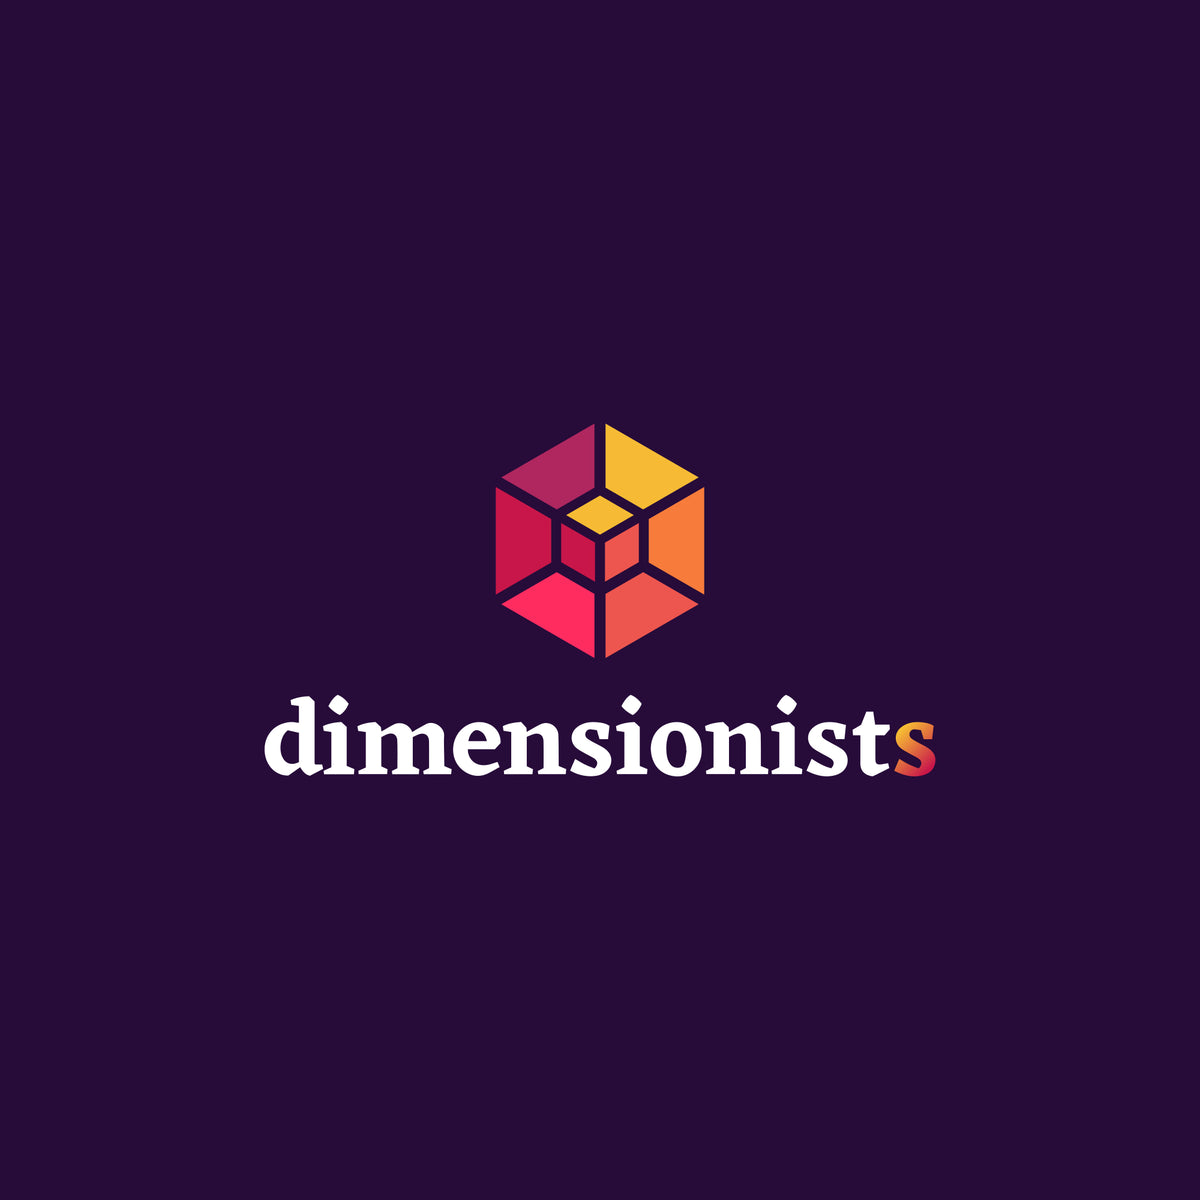 Dimensionists